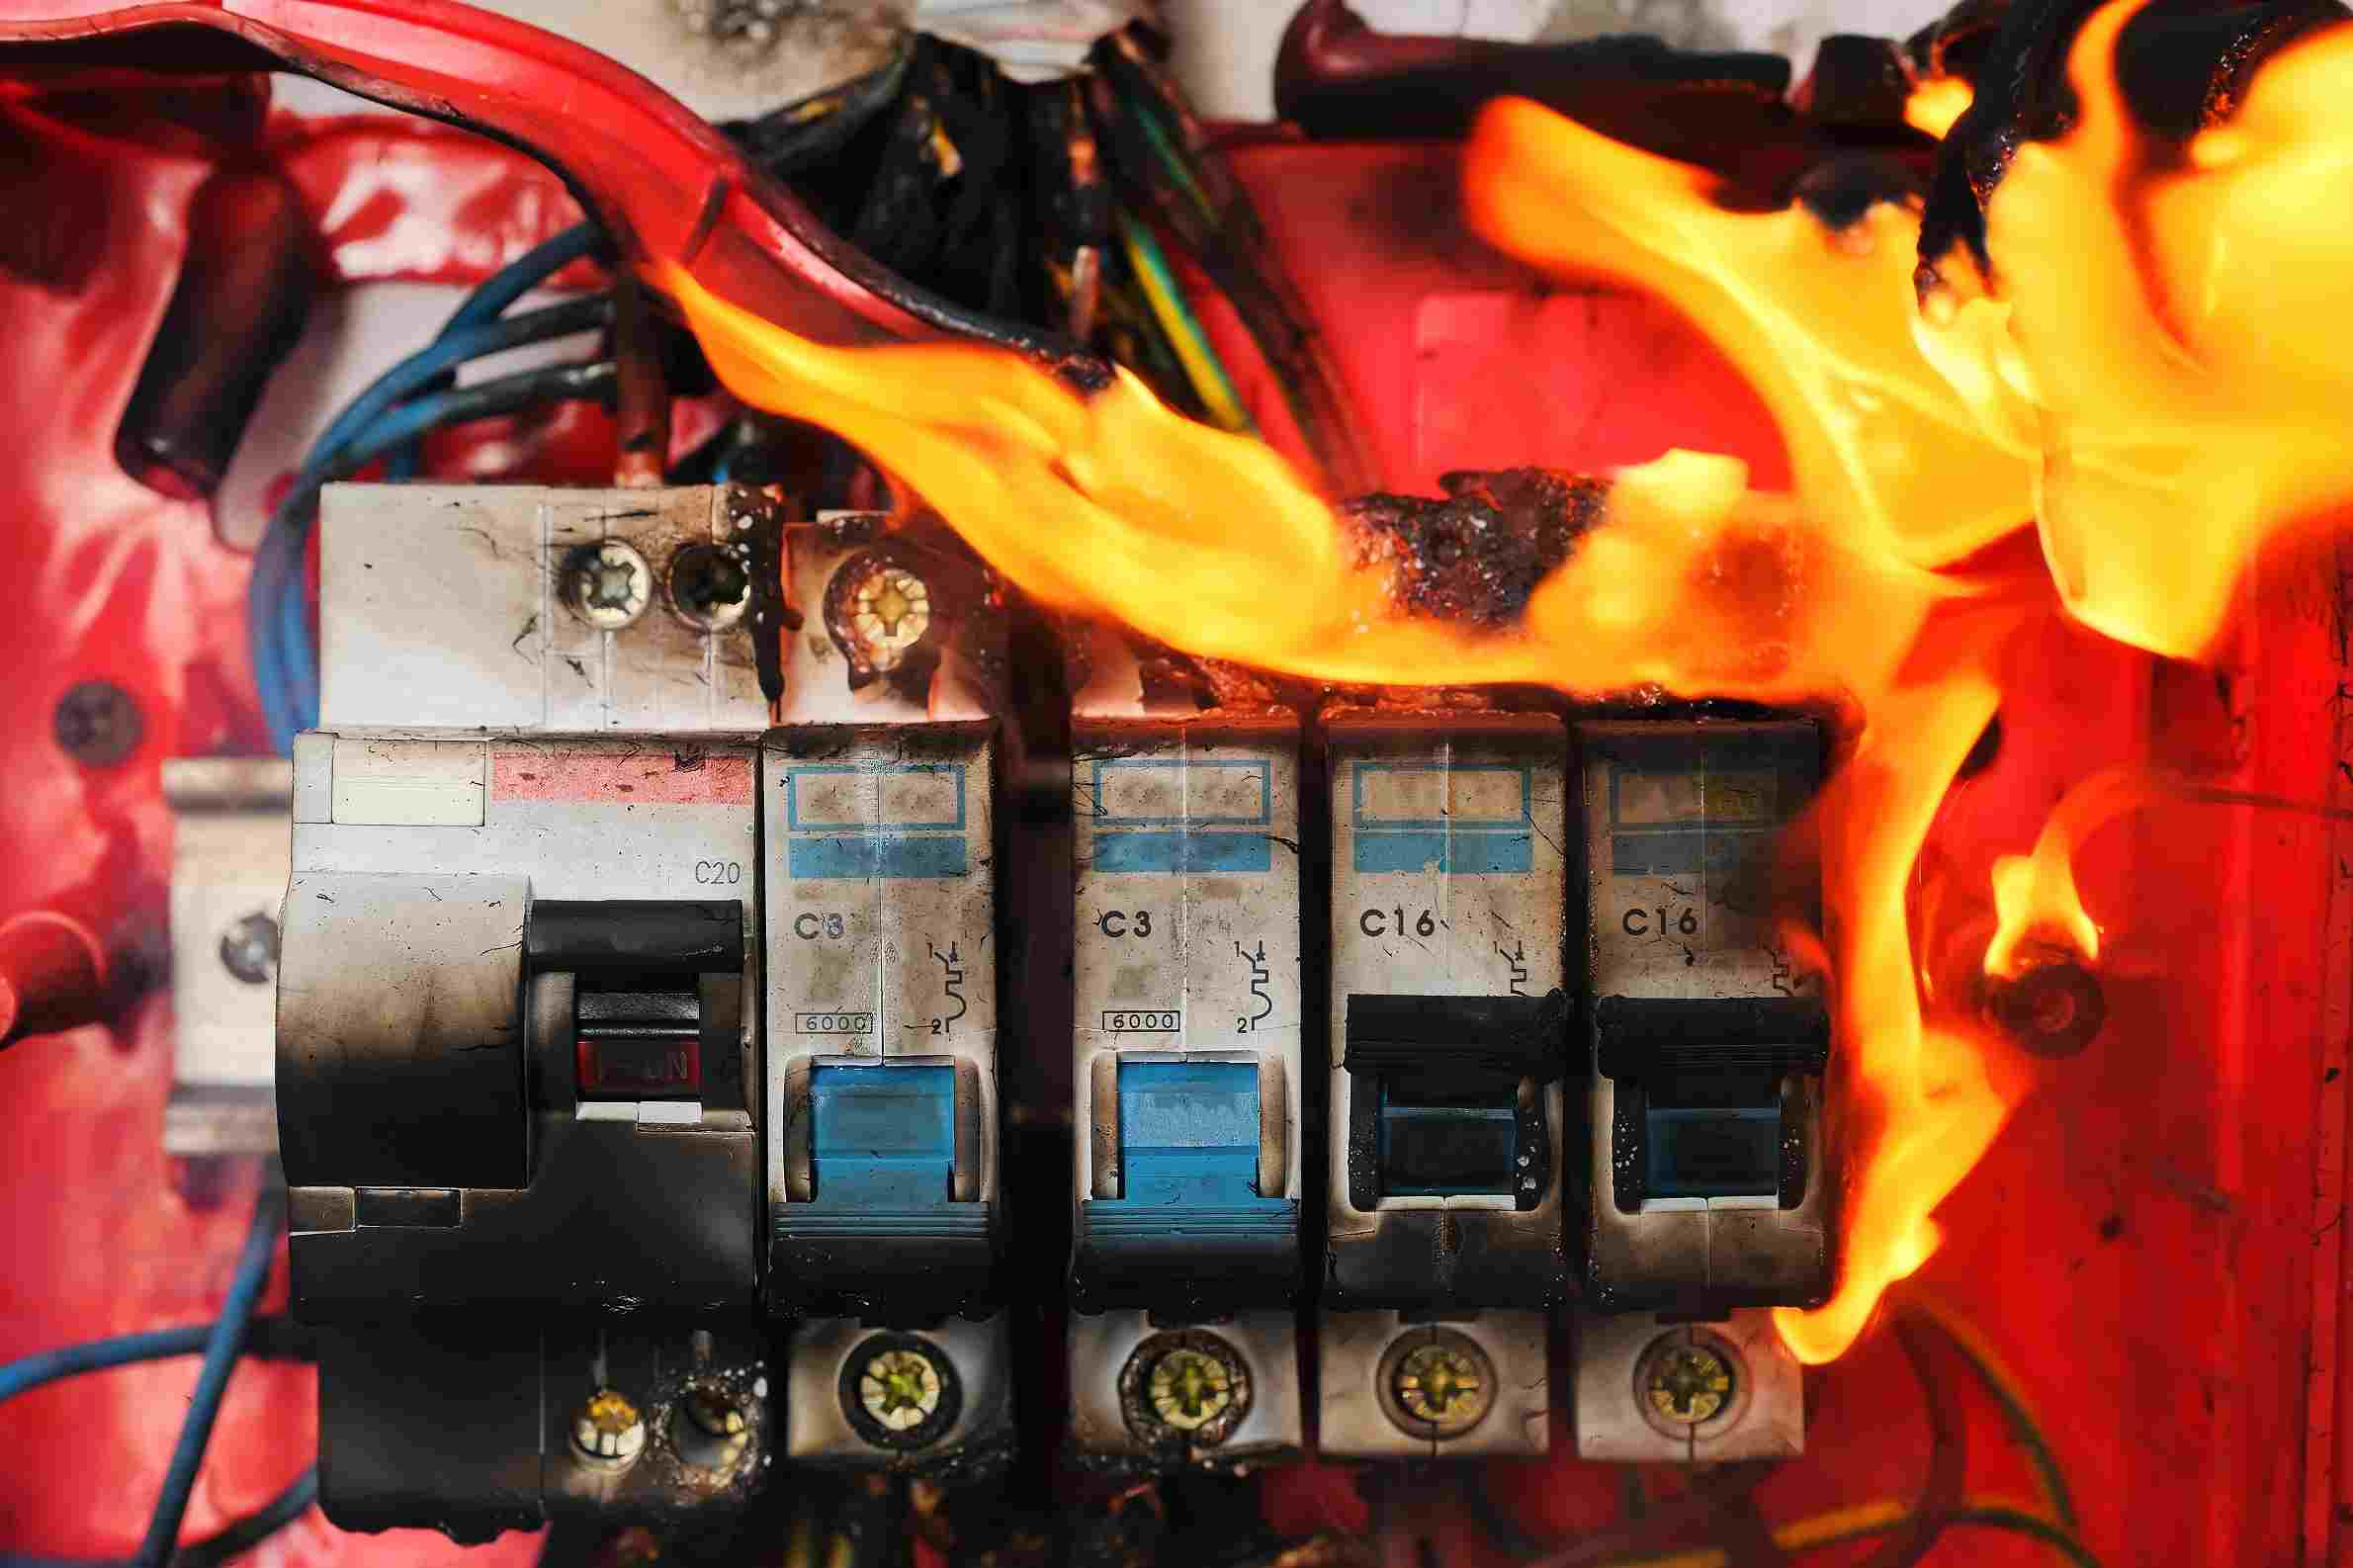 Electrical Inspections